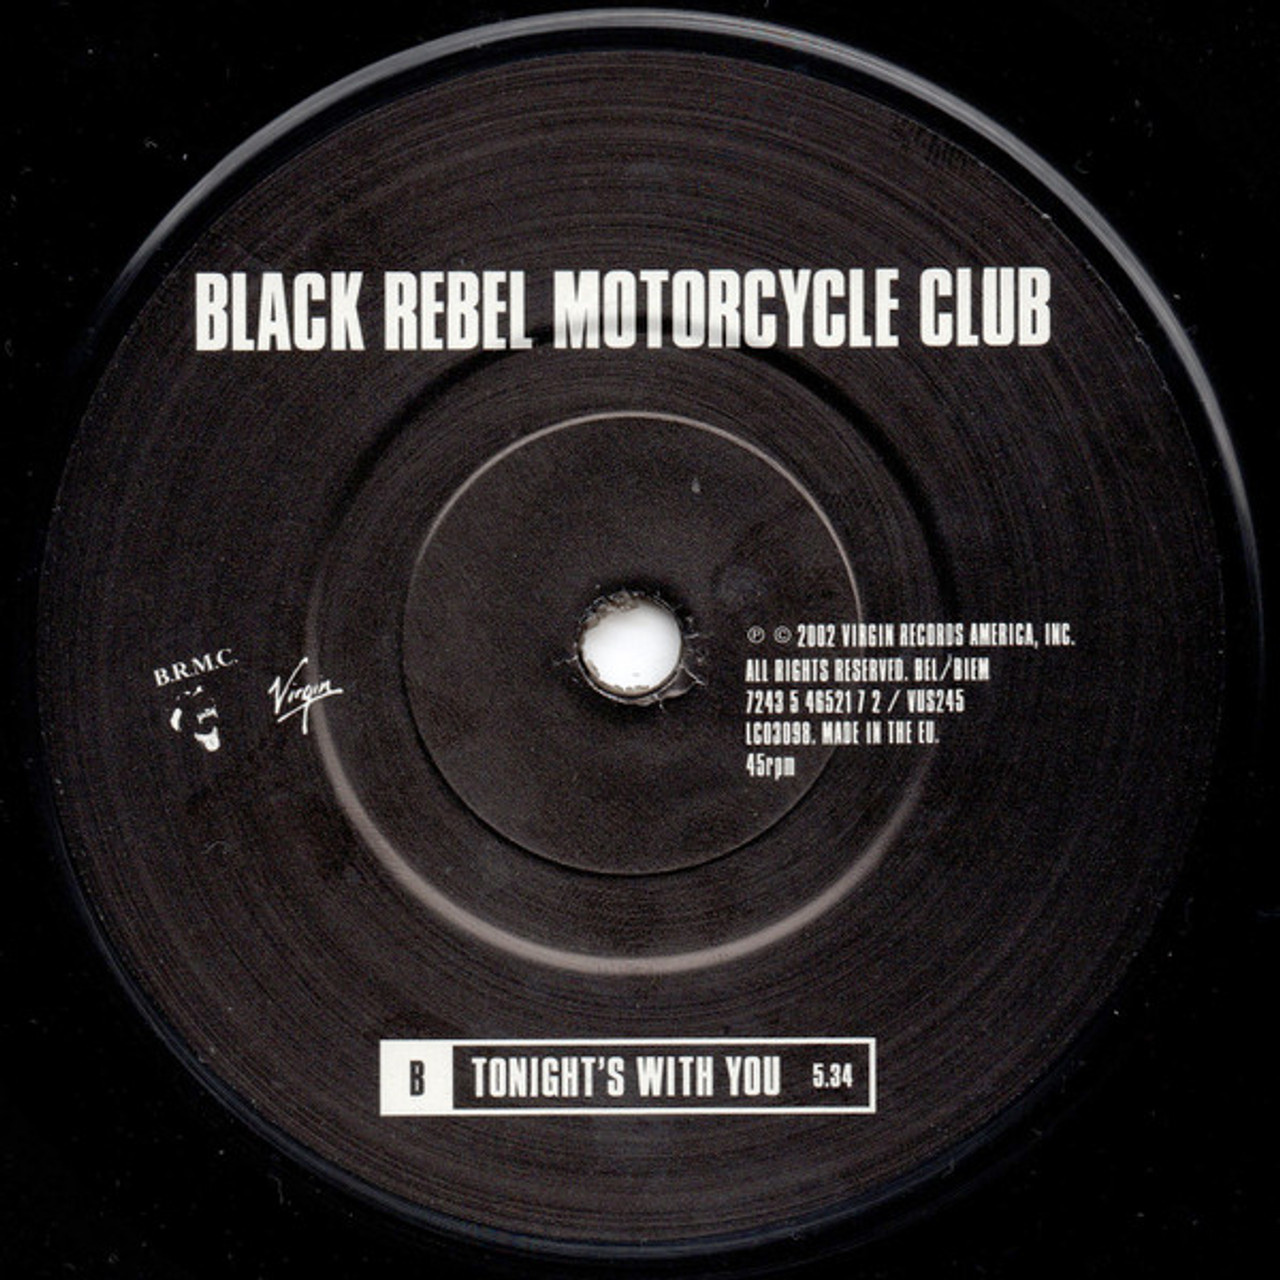 Black Rebel Motorcycle Club – Spread Your Love 2 track 7 inch single used  UK 2002 NM/